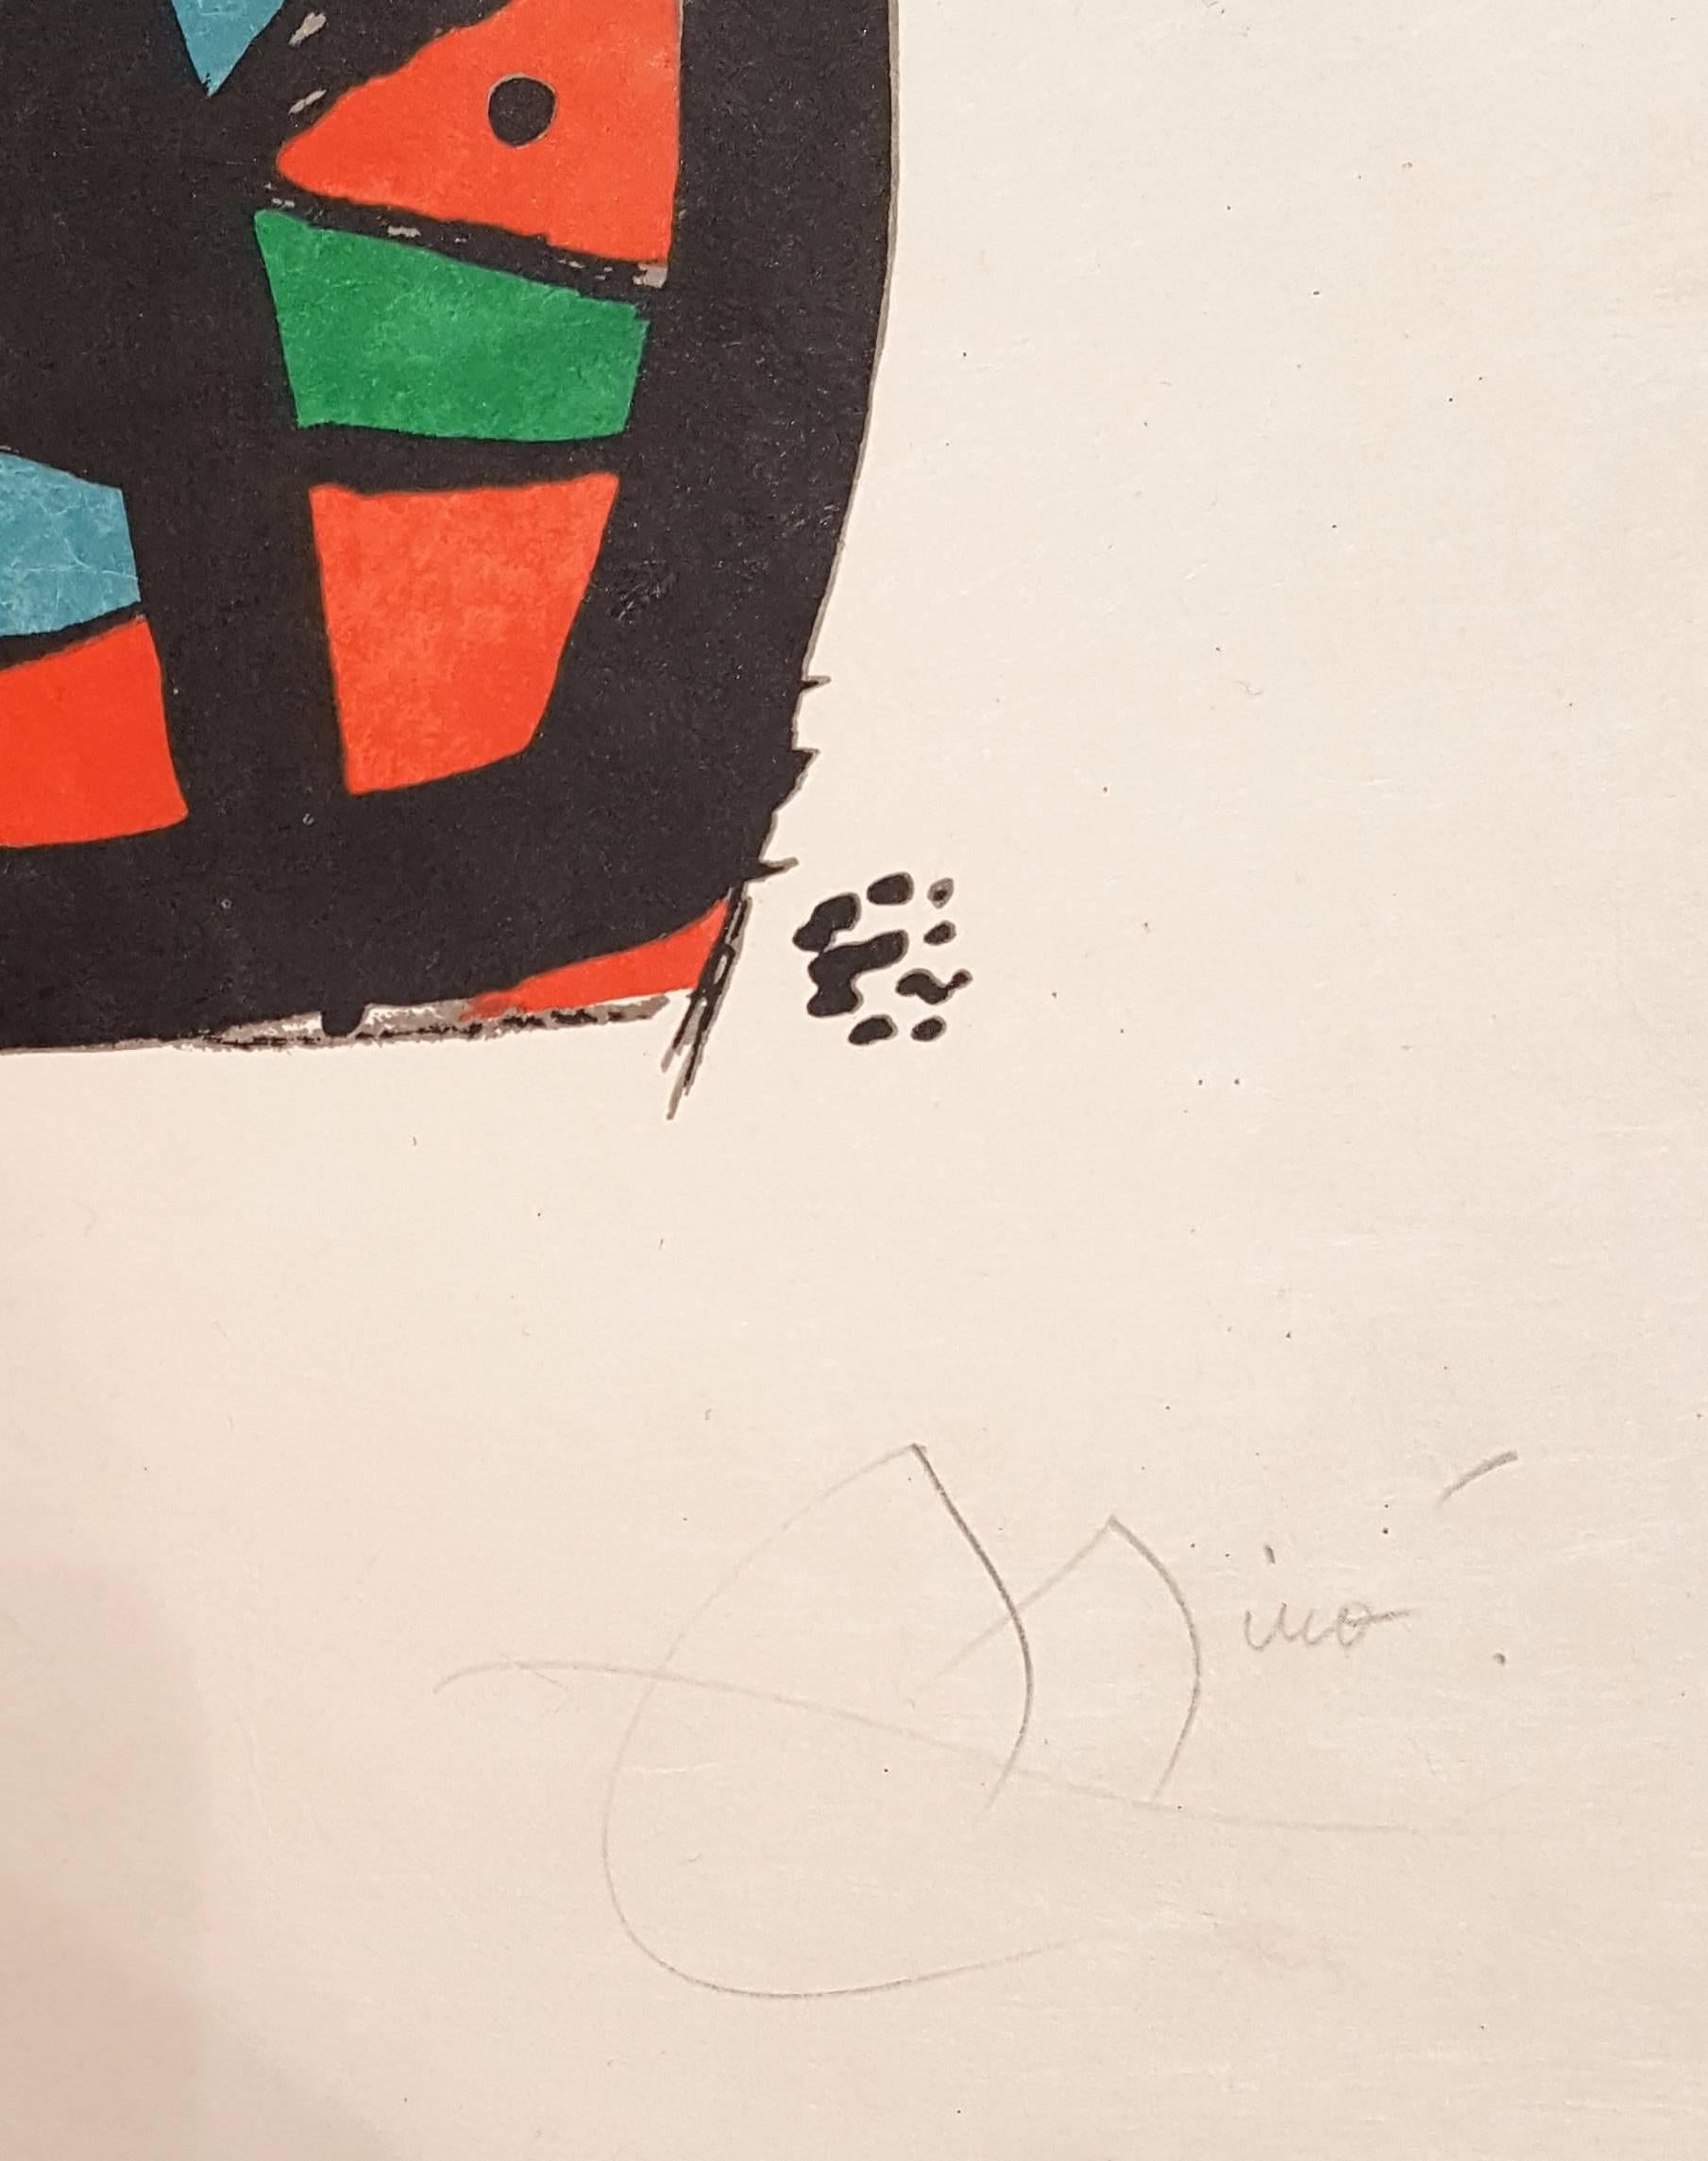 Melody Acid - Original Lithograph Handsigned - 38 copies - Abstract Print by Joan Miró